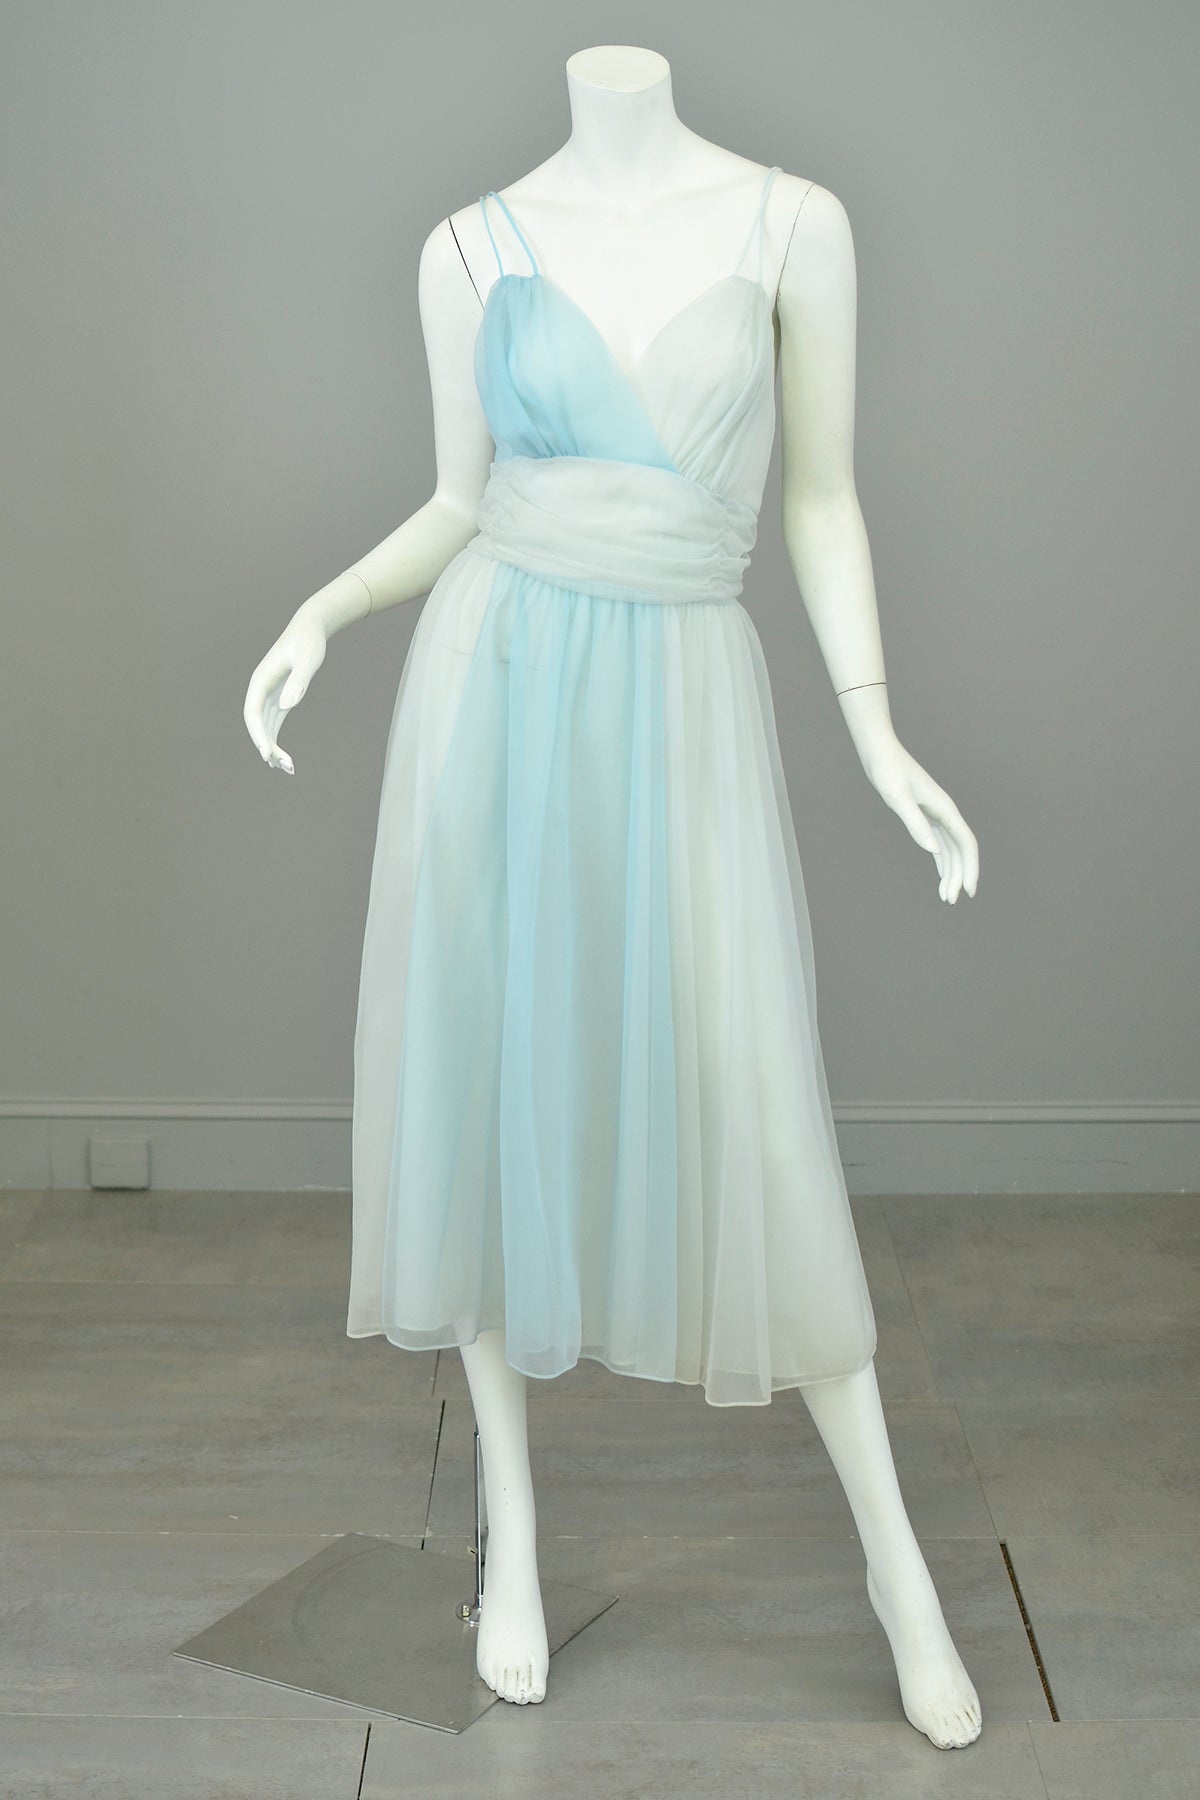 1960s Sky Blue Color Block Frothy Negligee Dress by Vanity Fair